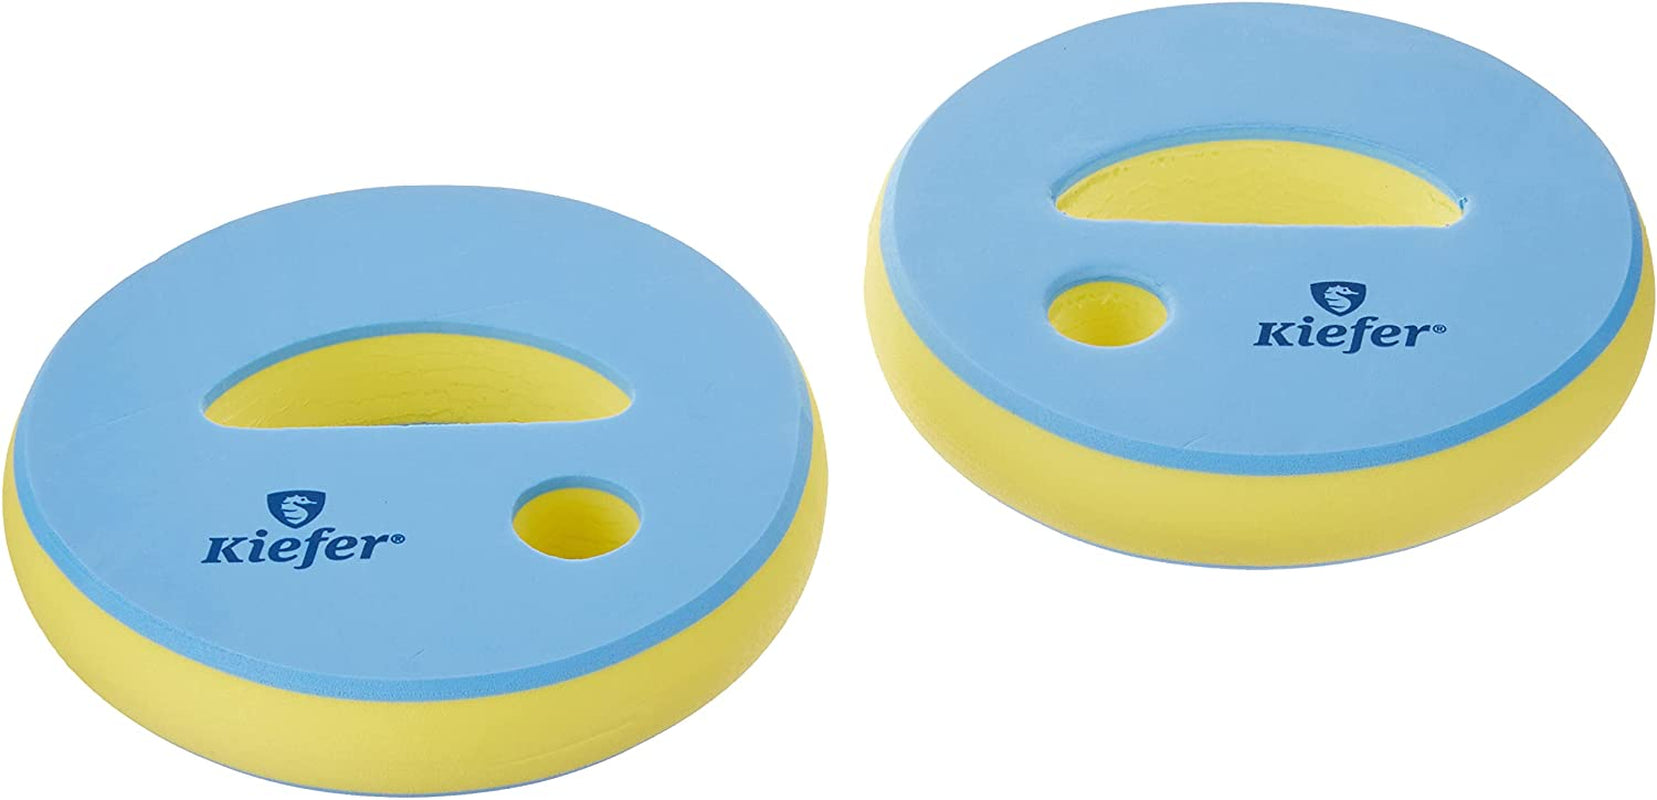 Water Exercise Discs with 7.5-Inch in Diameter (1-Pair), Blue